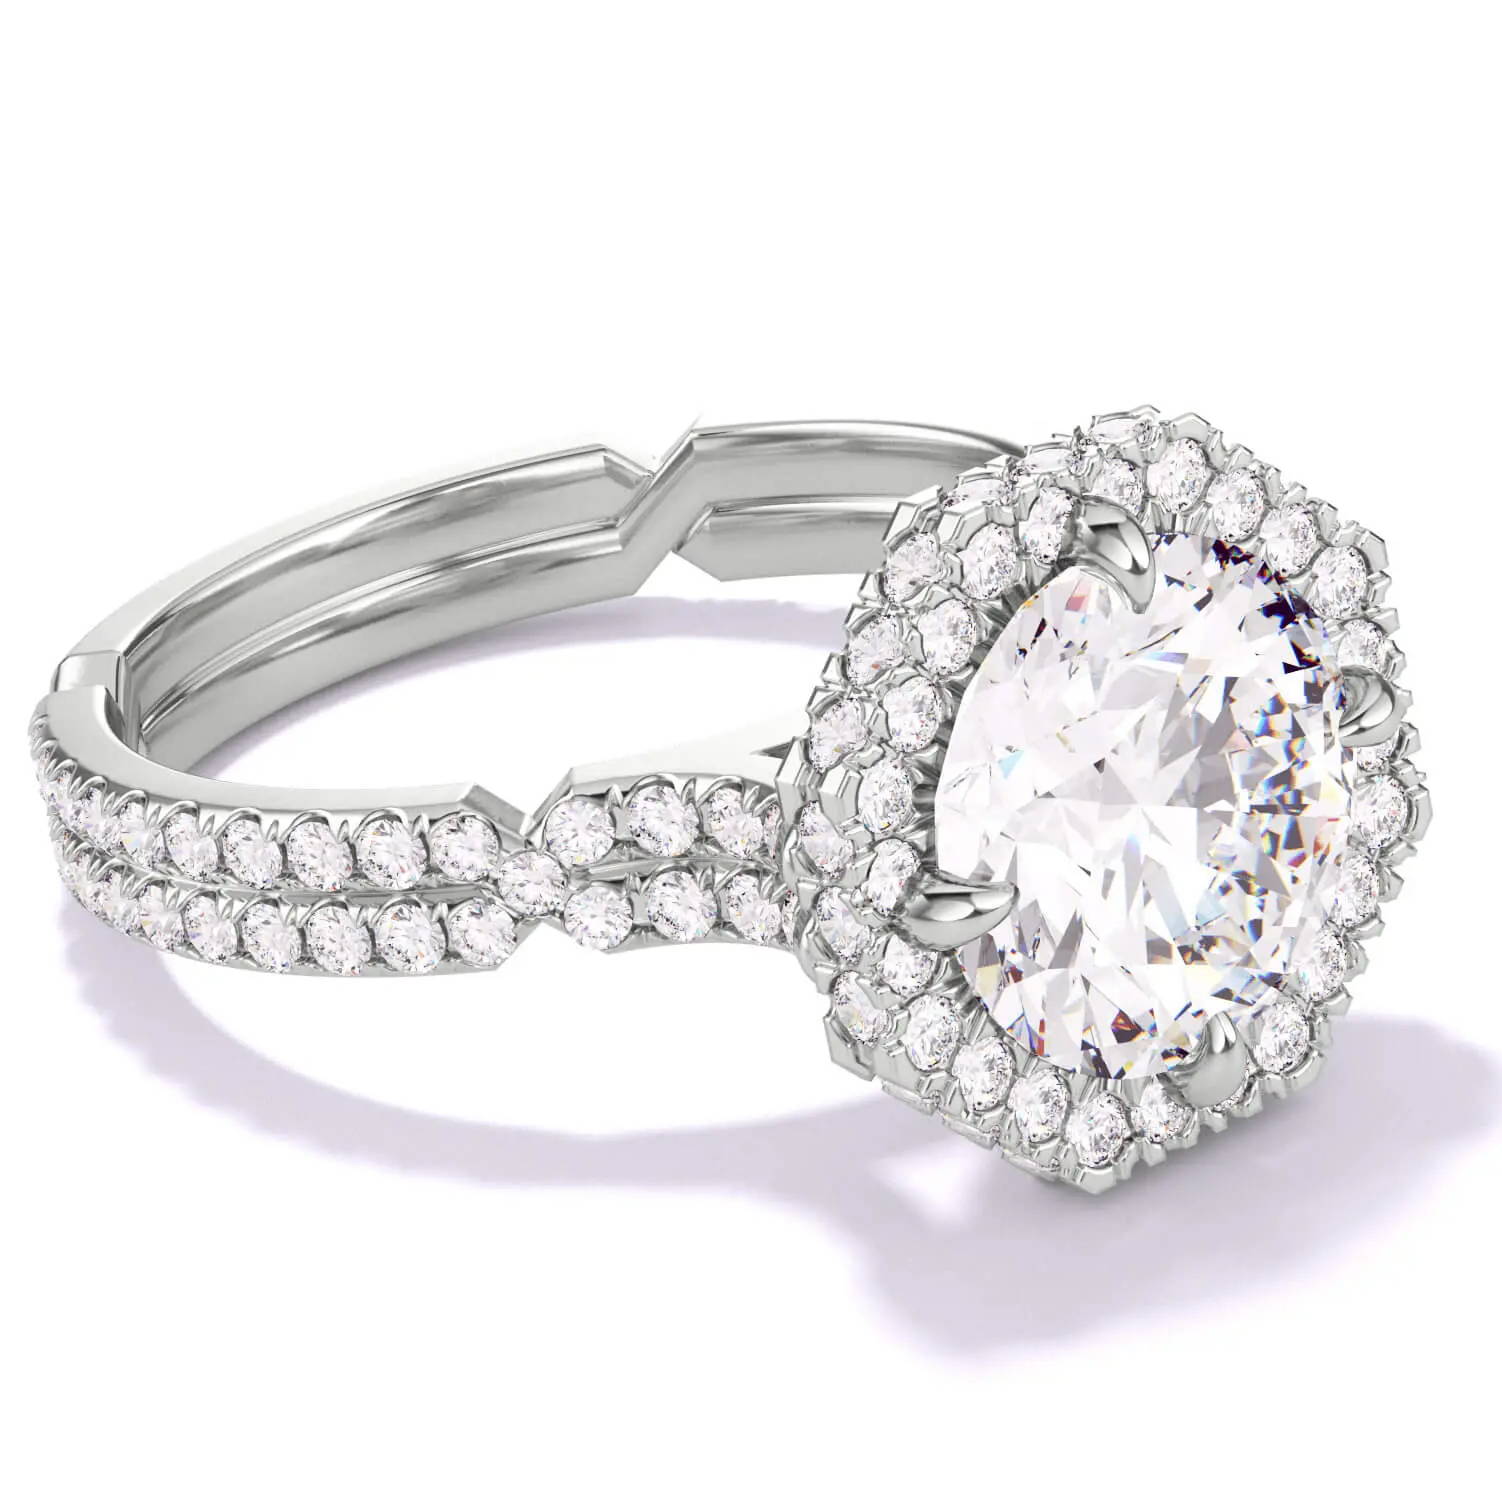 Round brilliant diamond engagement ring with an octagon halo setting